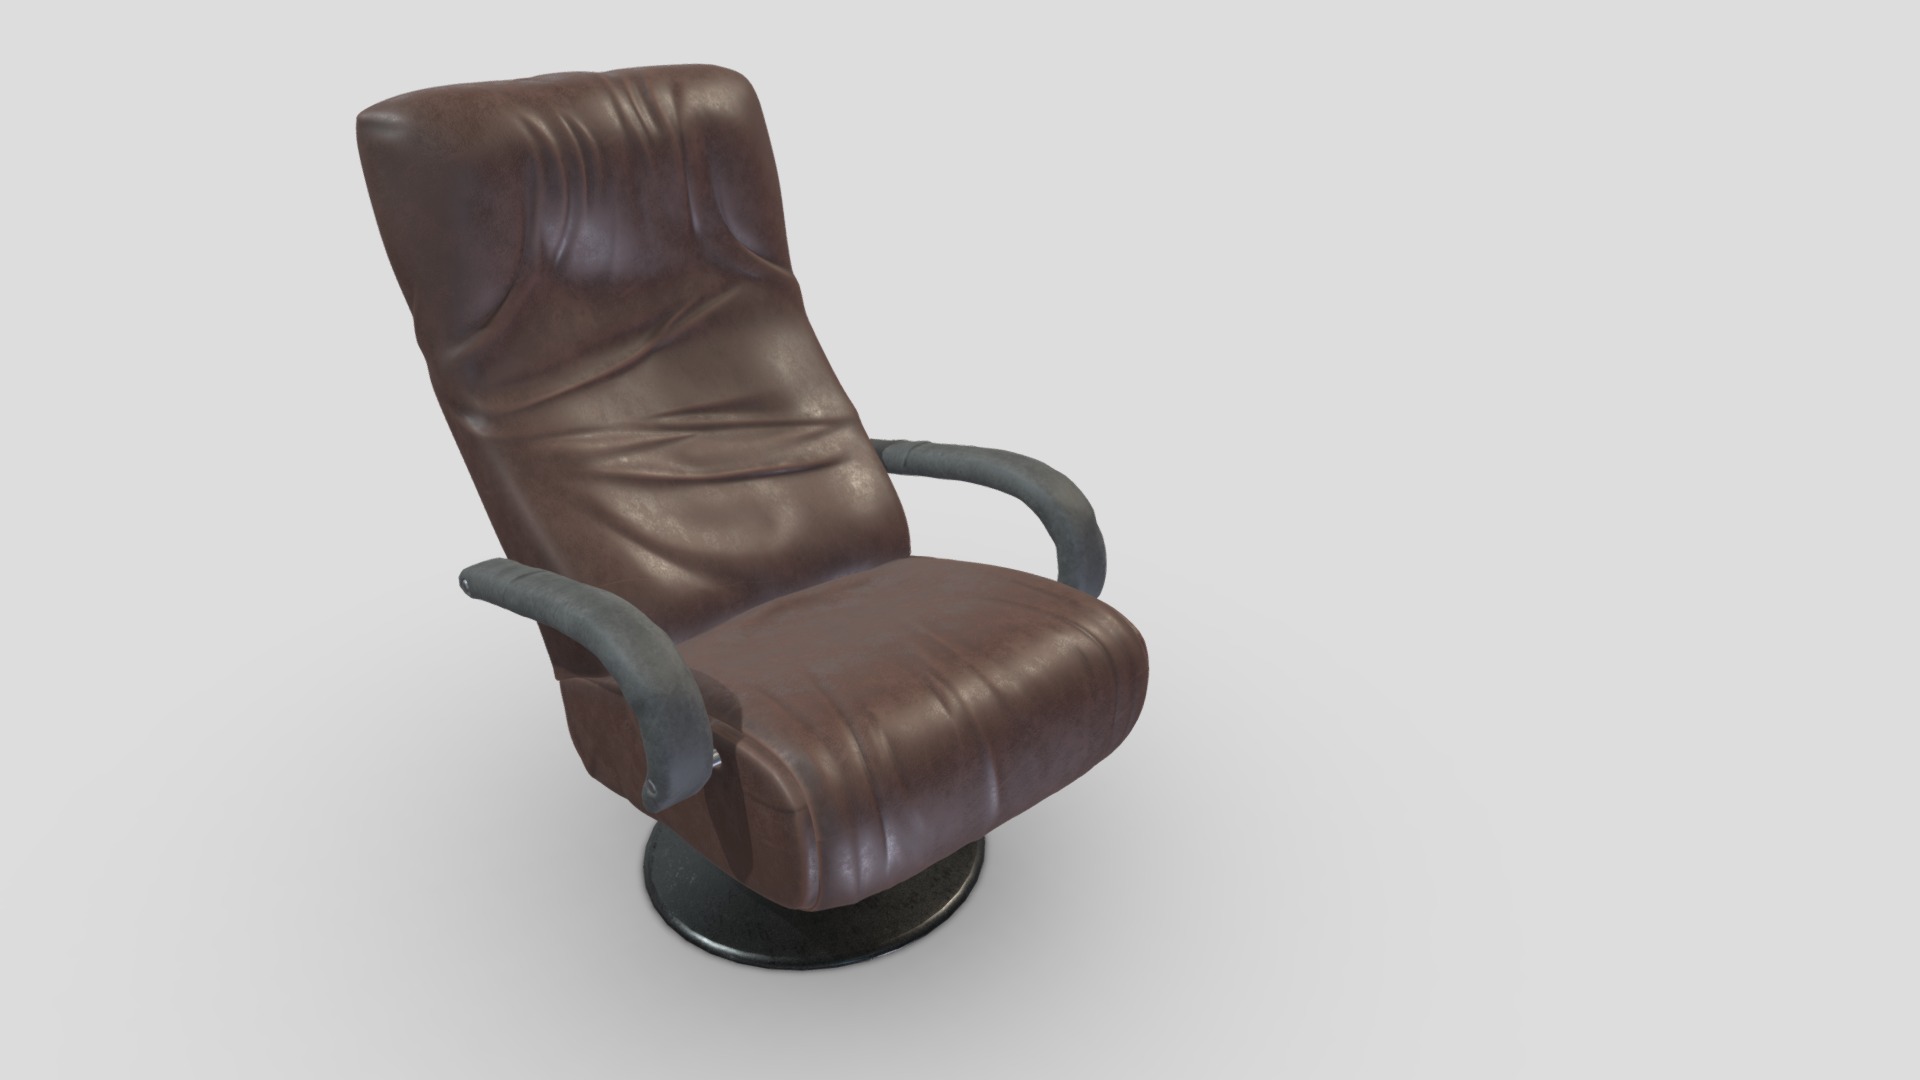 3D model Arm Chair 01 - This is a 3D model of the Arm Chair 01. The 3D model is about a brown leather chair.